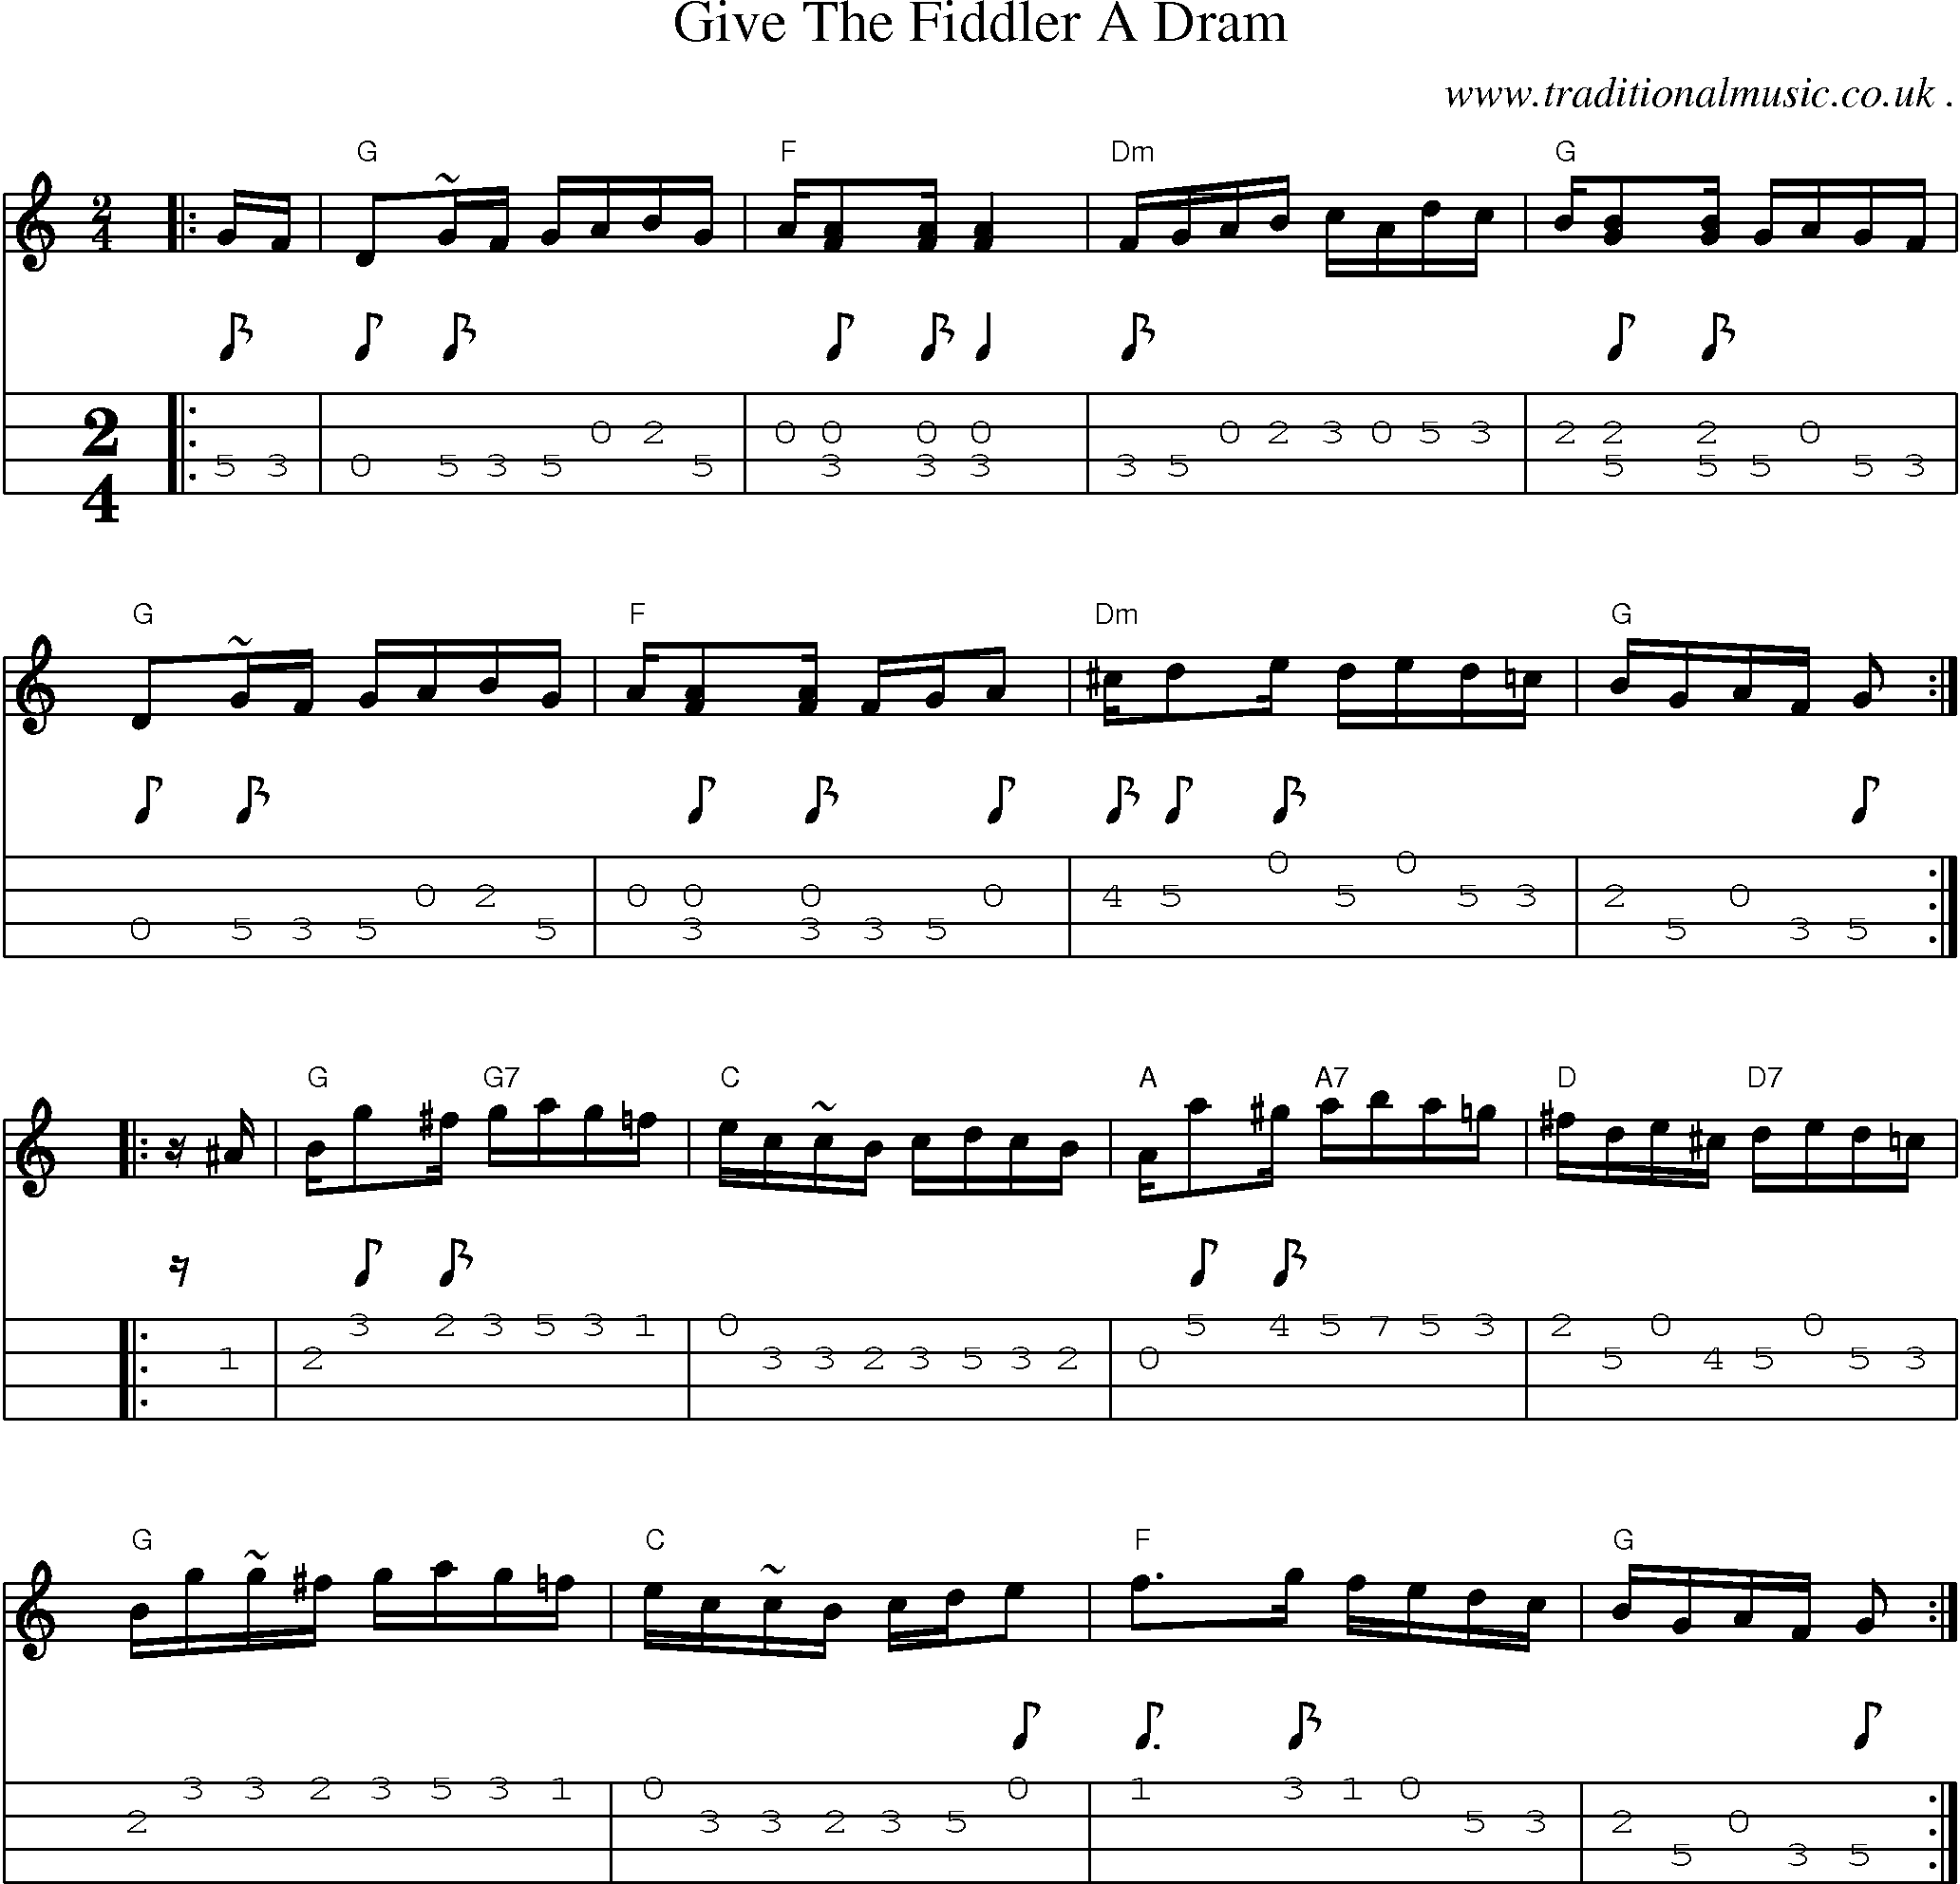 Music Score and Guitar Tabs for Give The Fiddler A Dram